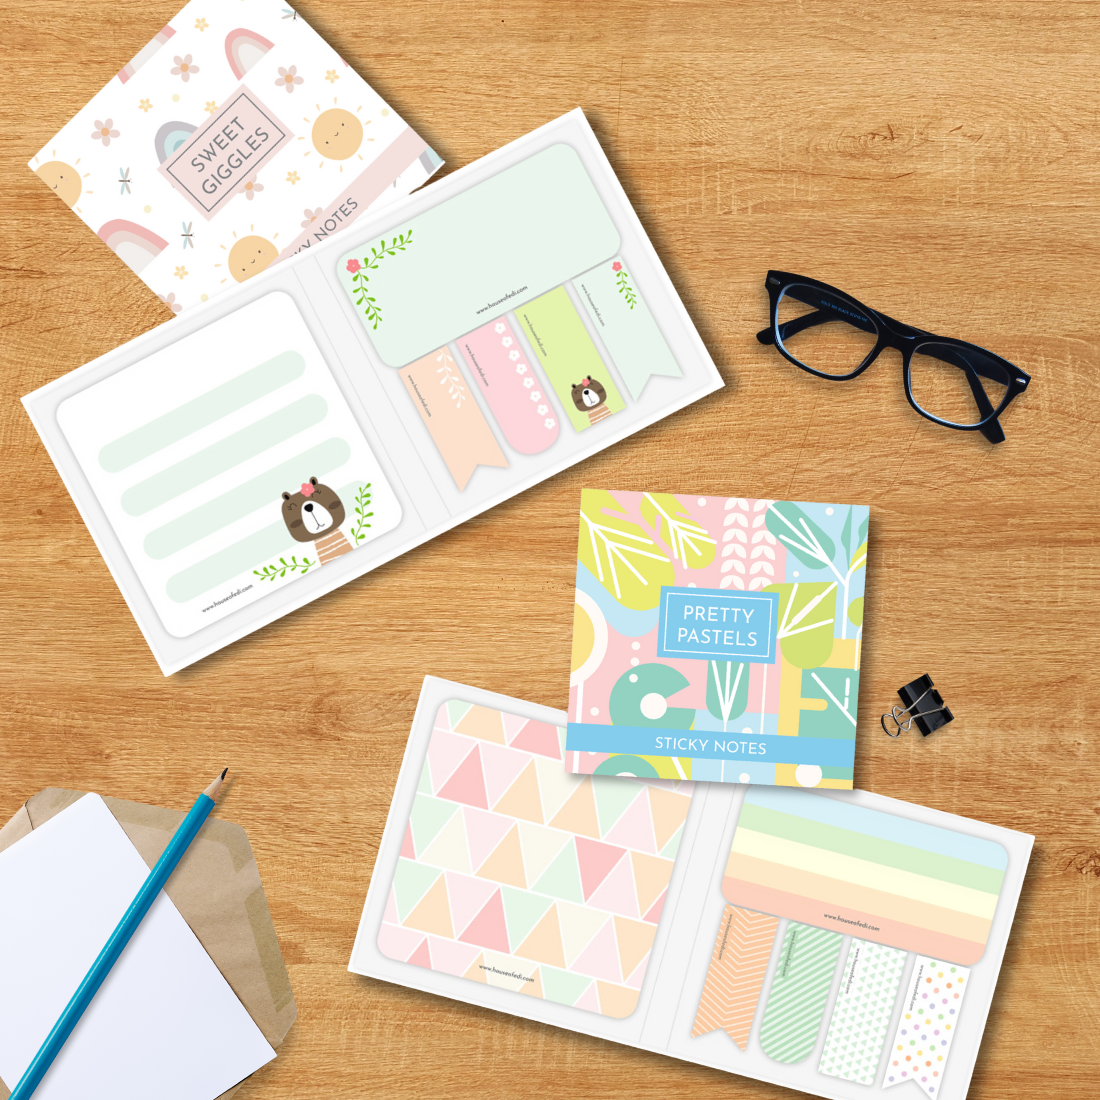 COMBO 2: Pretty Pastels + Sweet Giggles Sticky Notes Combo